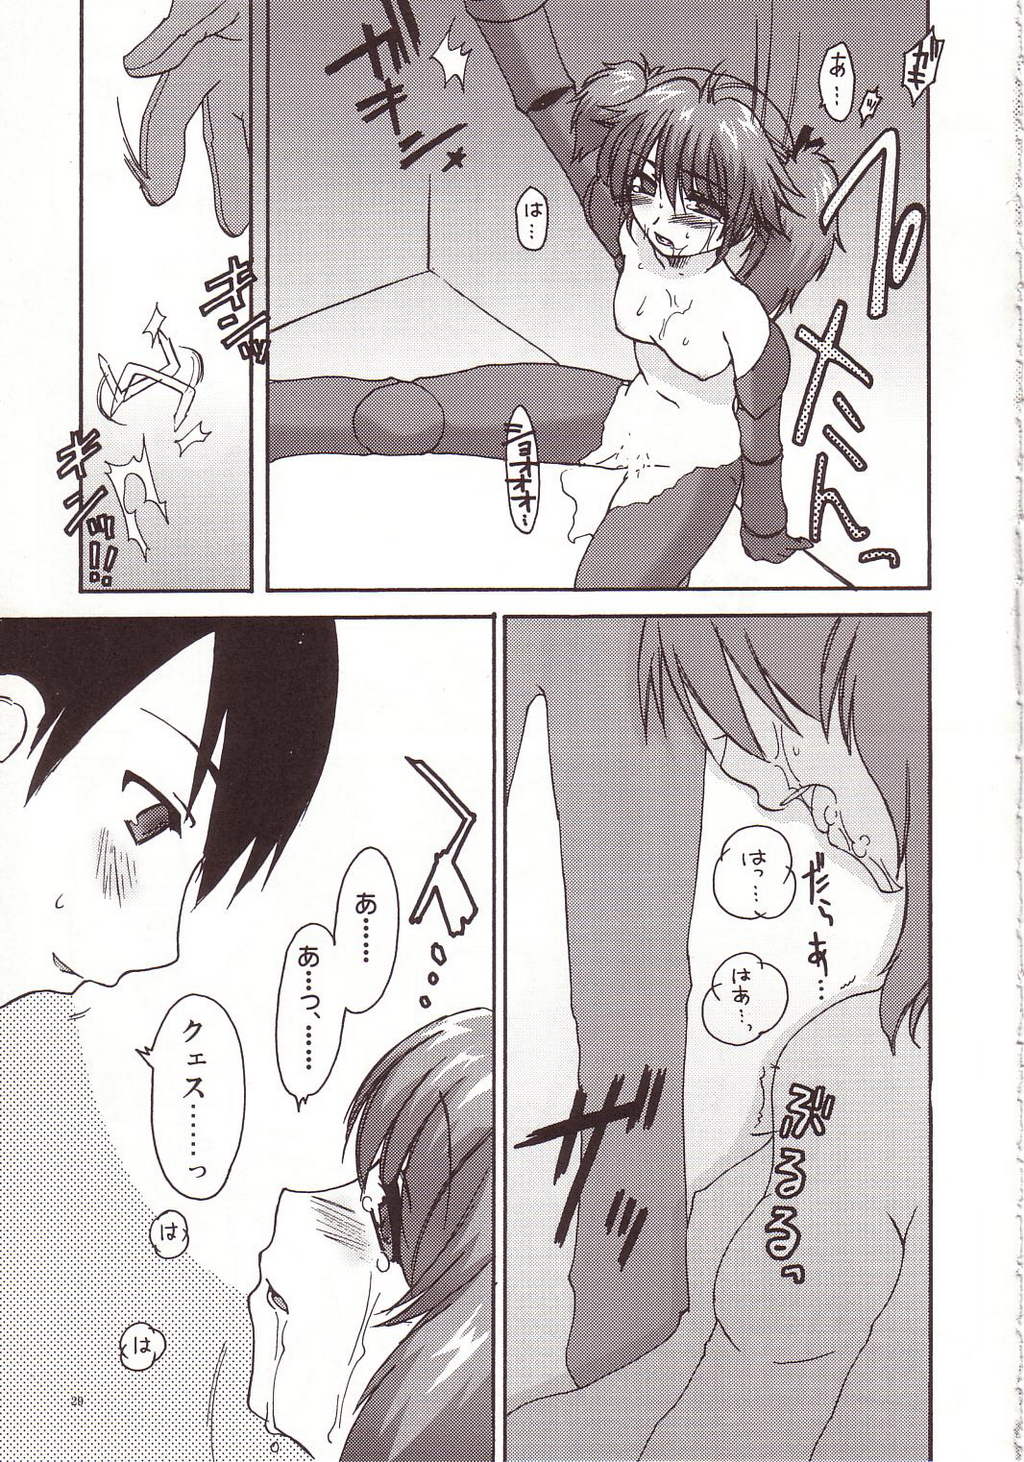 [AKABEi SOFT (Alpha)] Aishitai I WANT TO LOVE (Mobile Suit Gundam Char's Counterattack) page 28 full